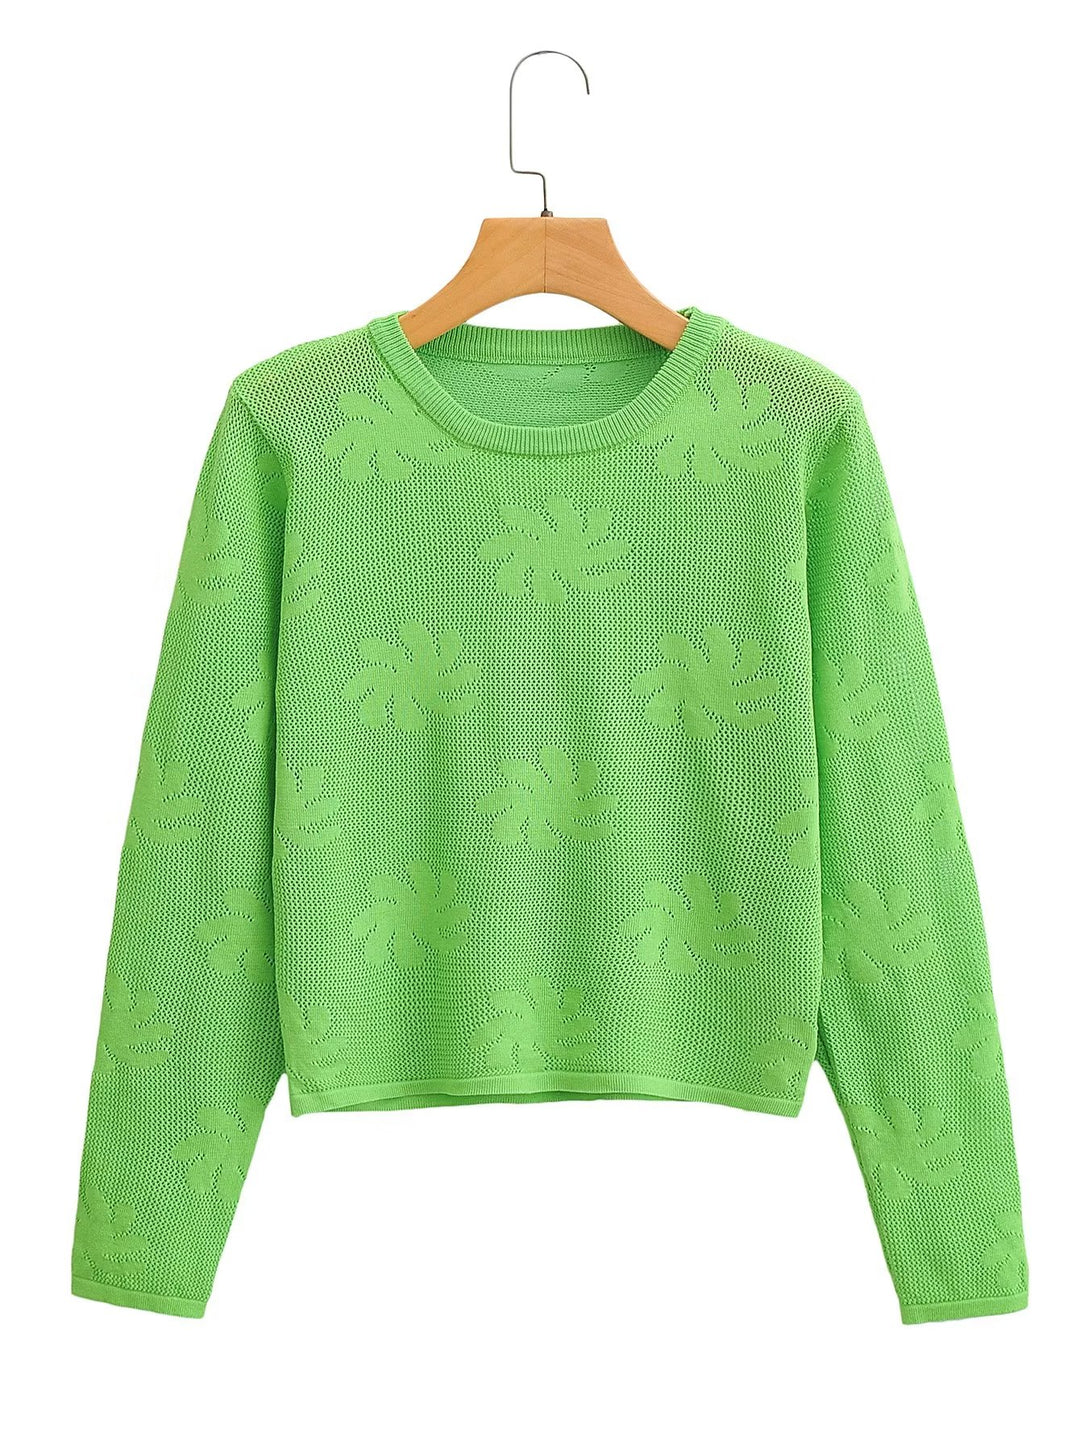 Fall Casual round Neck Pullover Long Sleeve Translucent Floral Print Knitwear